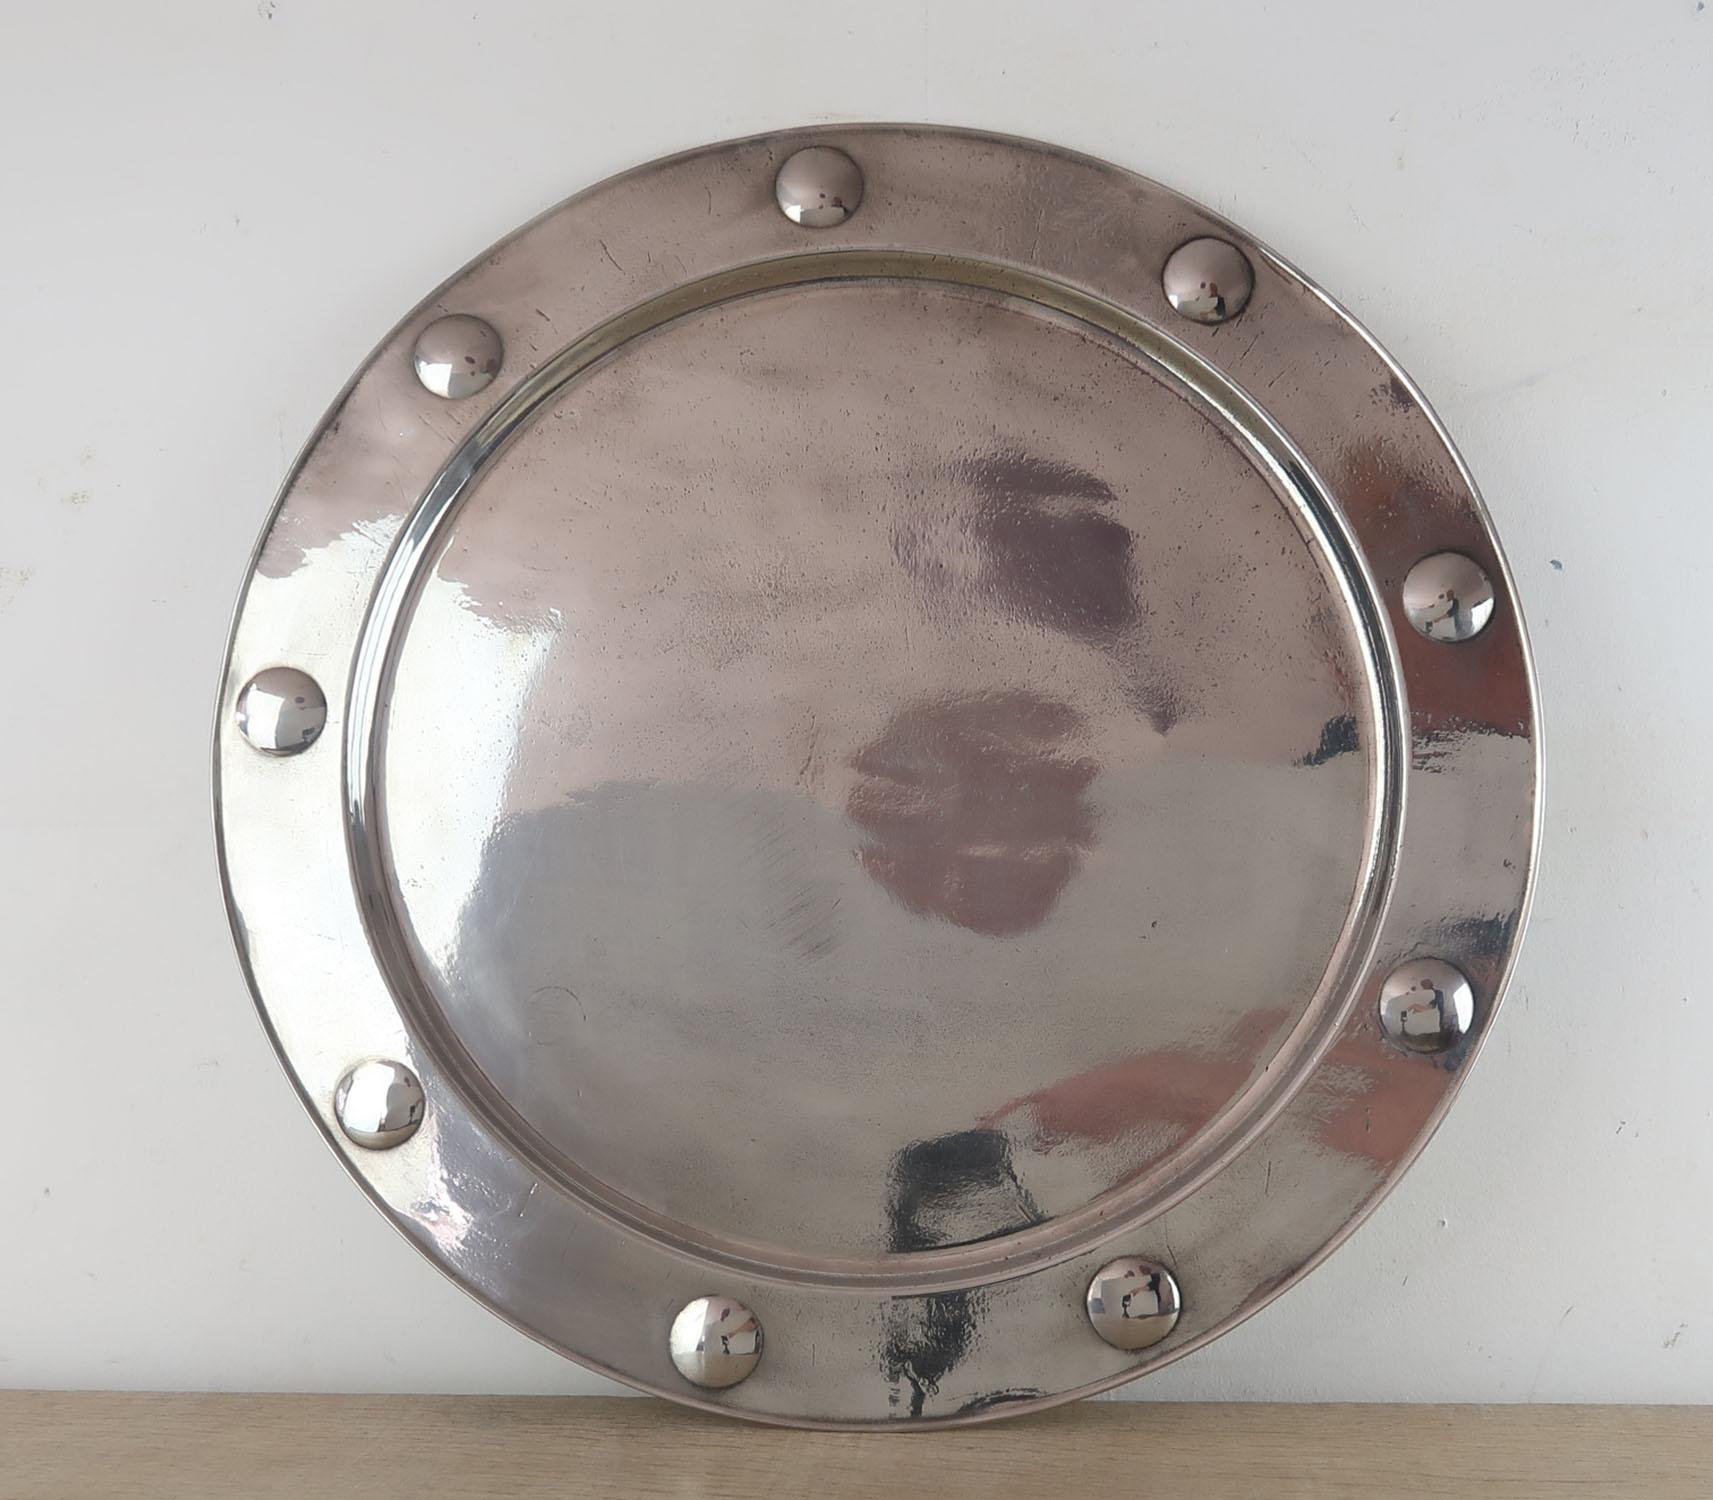 Wonderful highly polished pewter tray

Great simple lines. 

Off the S.S Orania. Marks on the underside of the rim

Probably Dutch. Marked Holland.






 







 